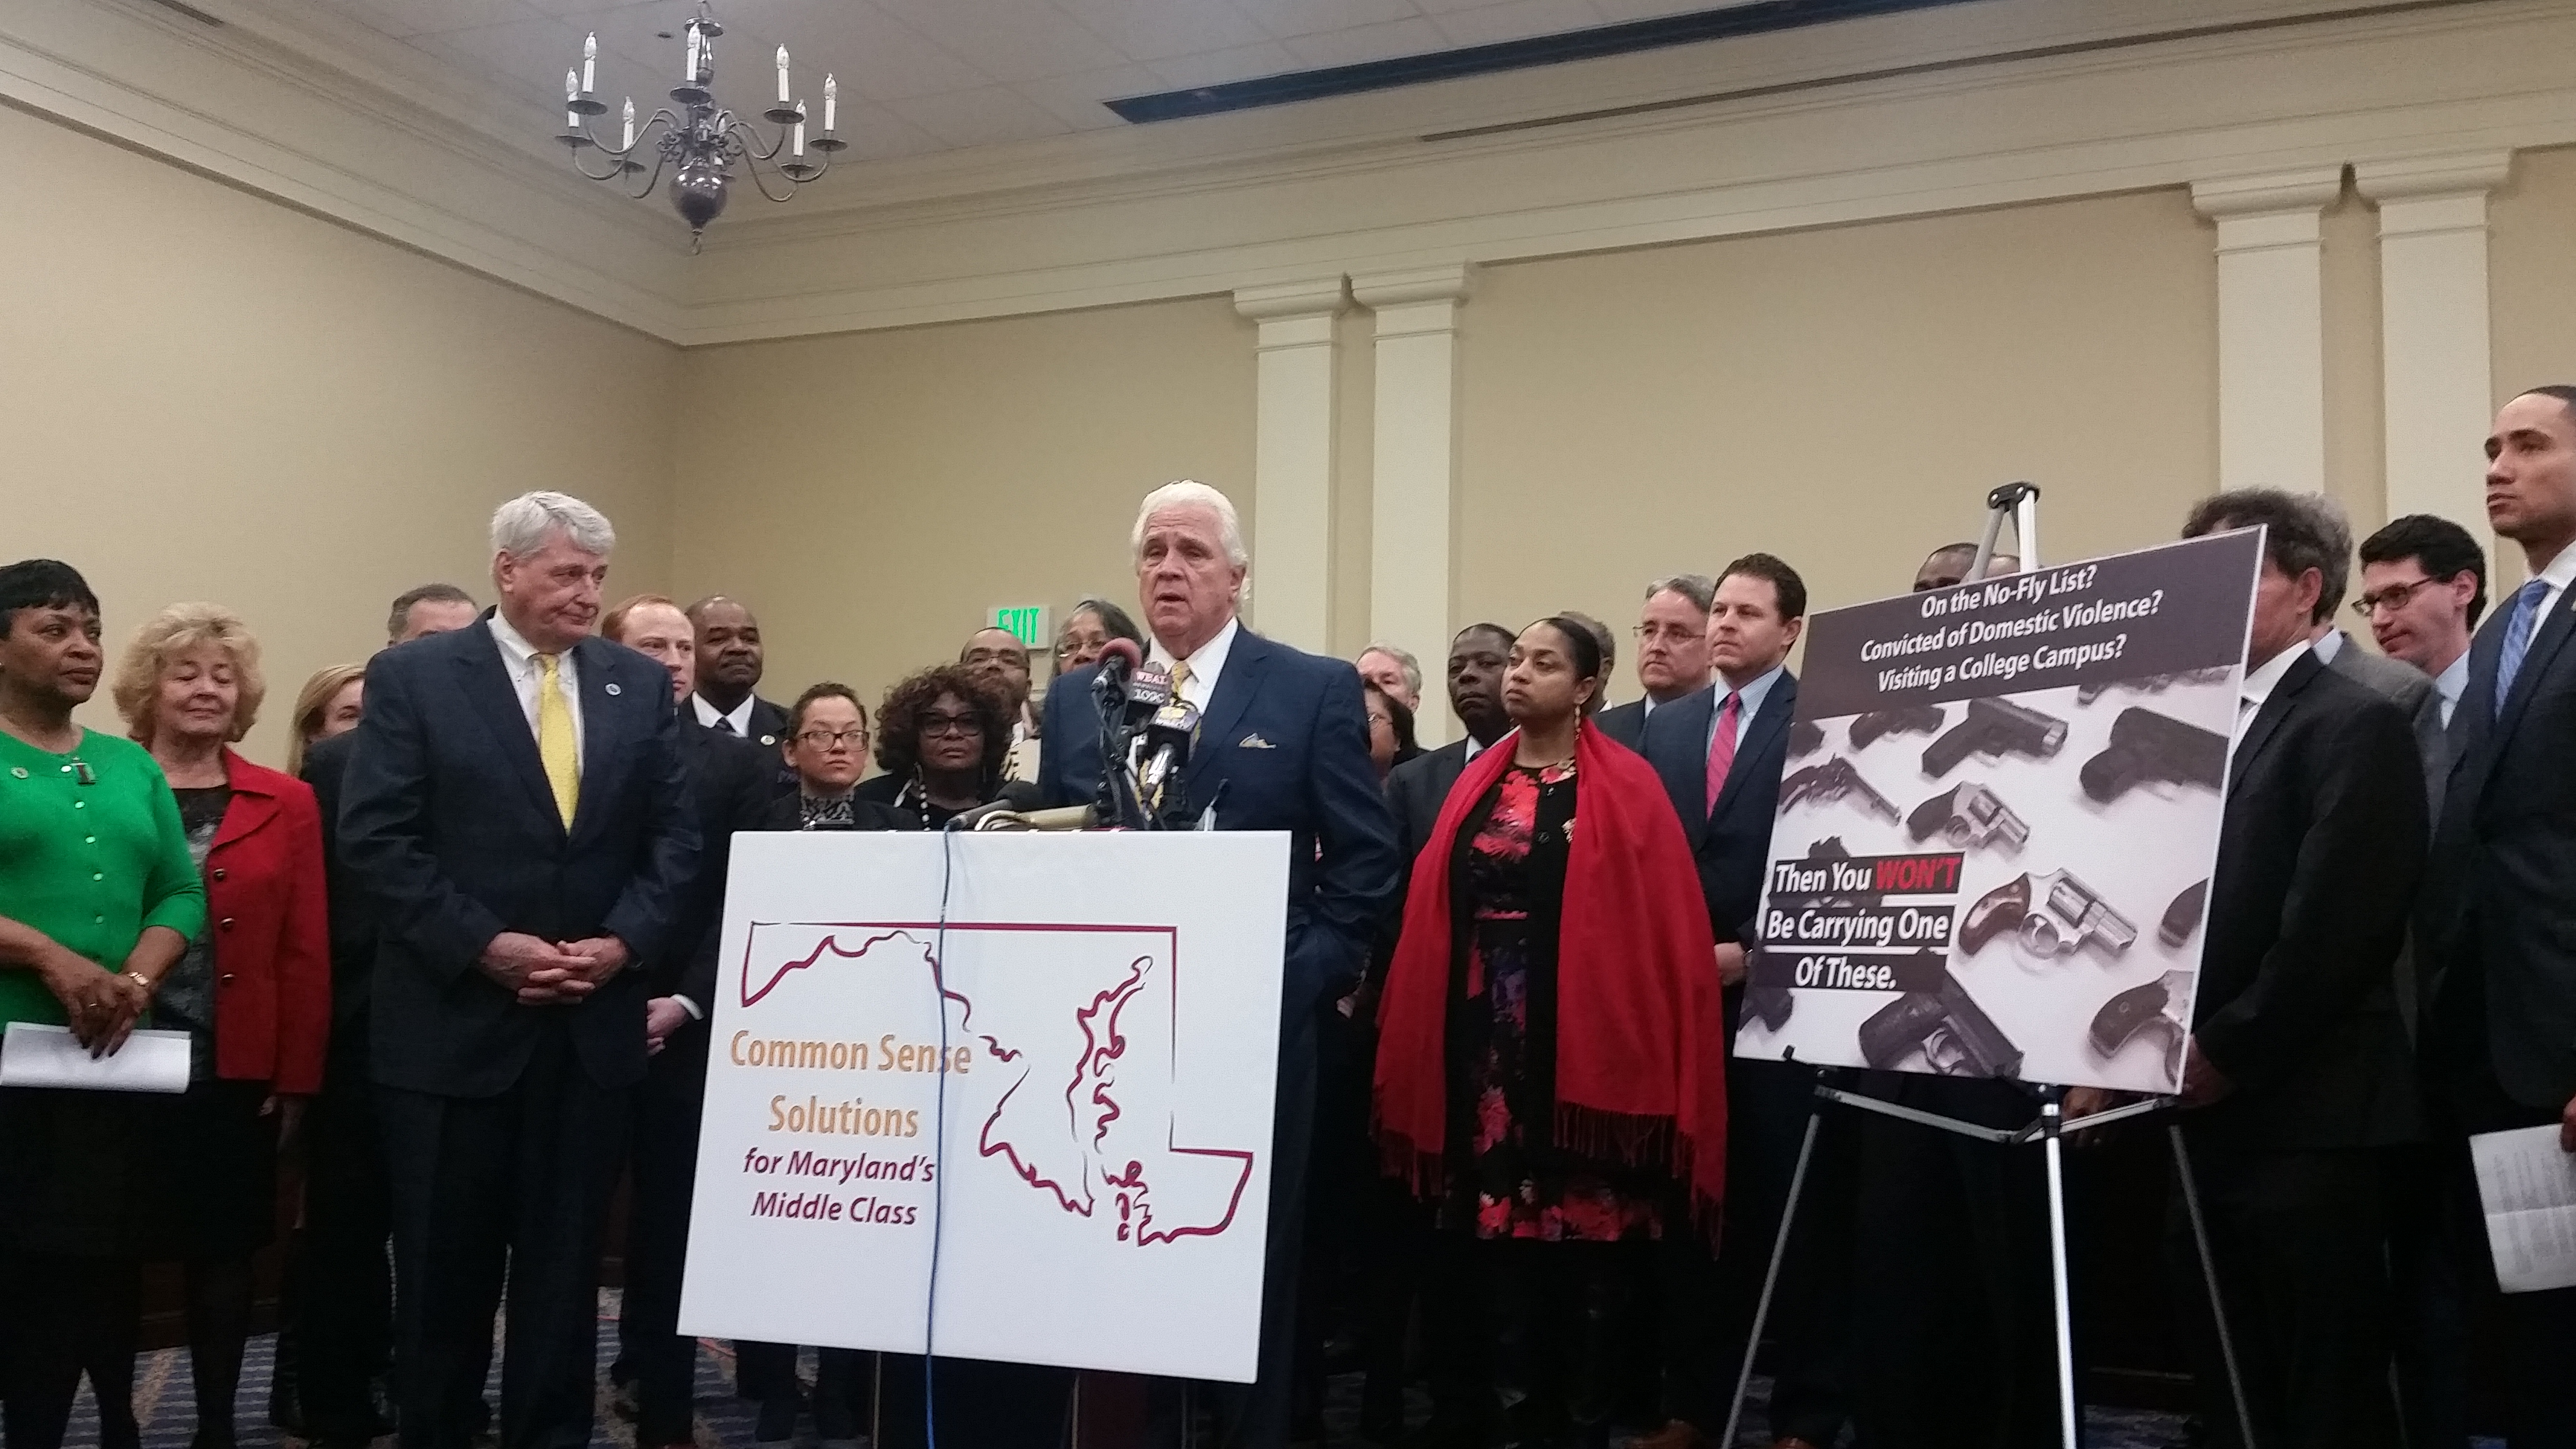 Senate President Thomas V. Mike Miller Jr., D-Calvert, said having six grandchildren in college made him prioritize banning guns on college campuses. This was one of three gun-related bills that Maryland Democrats announced on Wednesday February 10, 2016, in Annapolis. (Capital News Service Photo by Rachel Bluth).